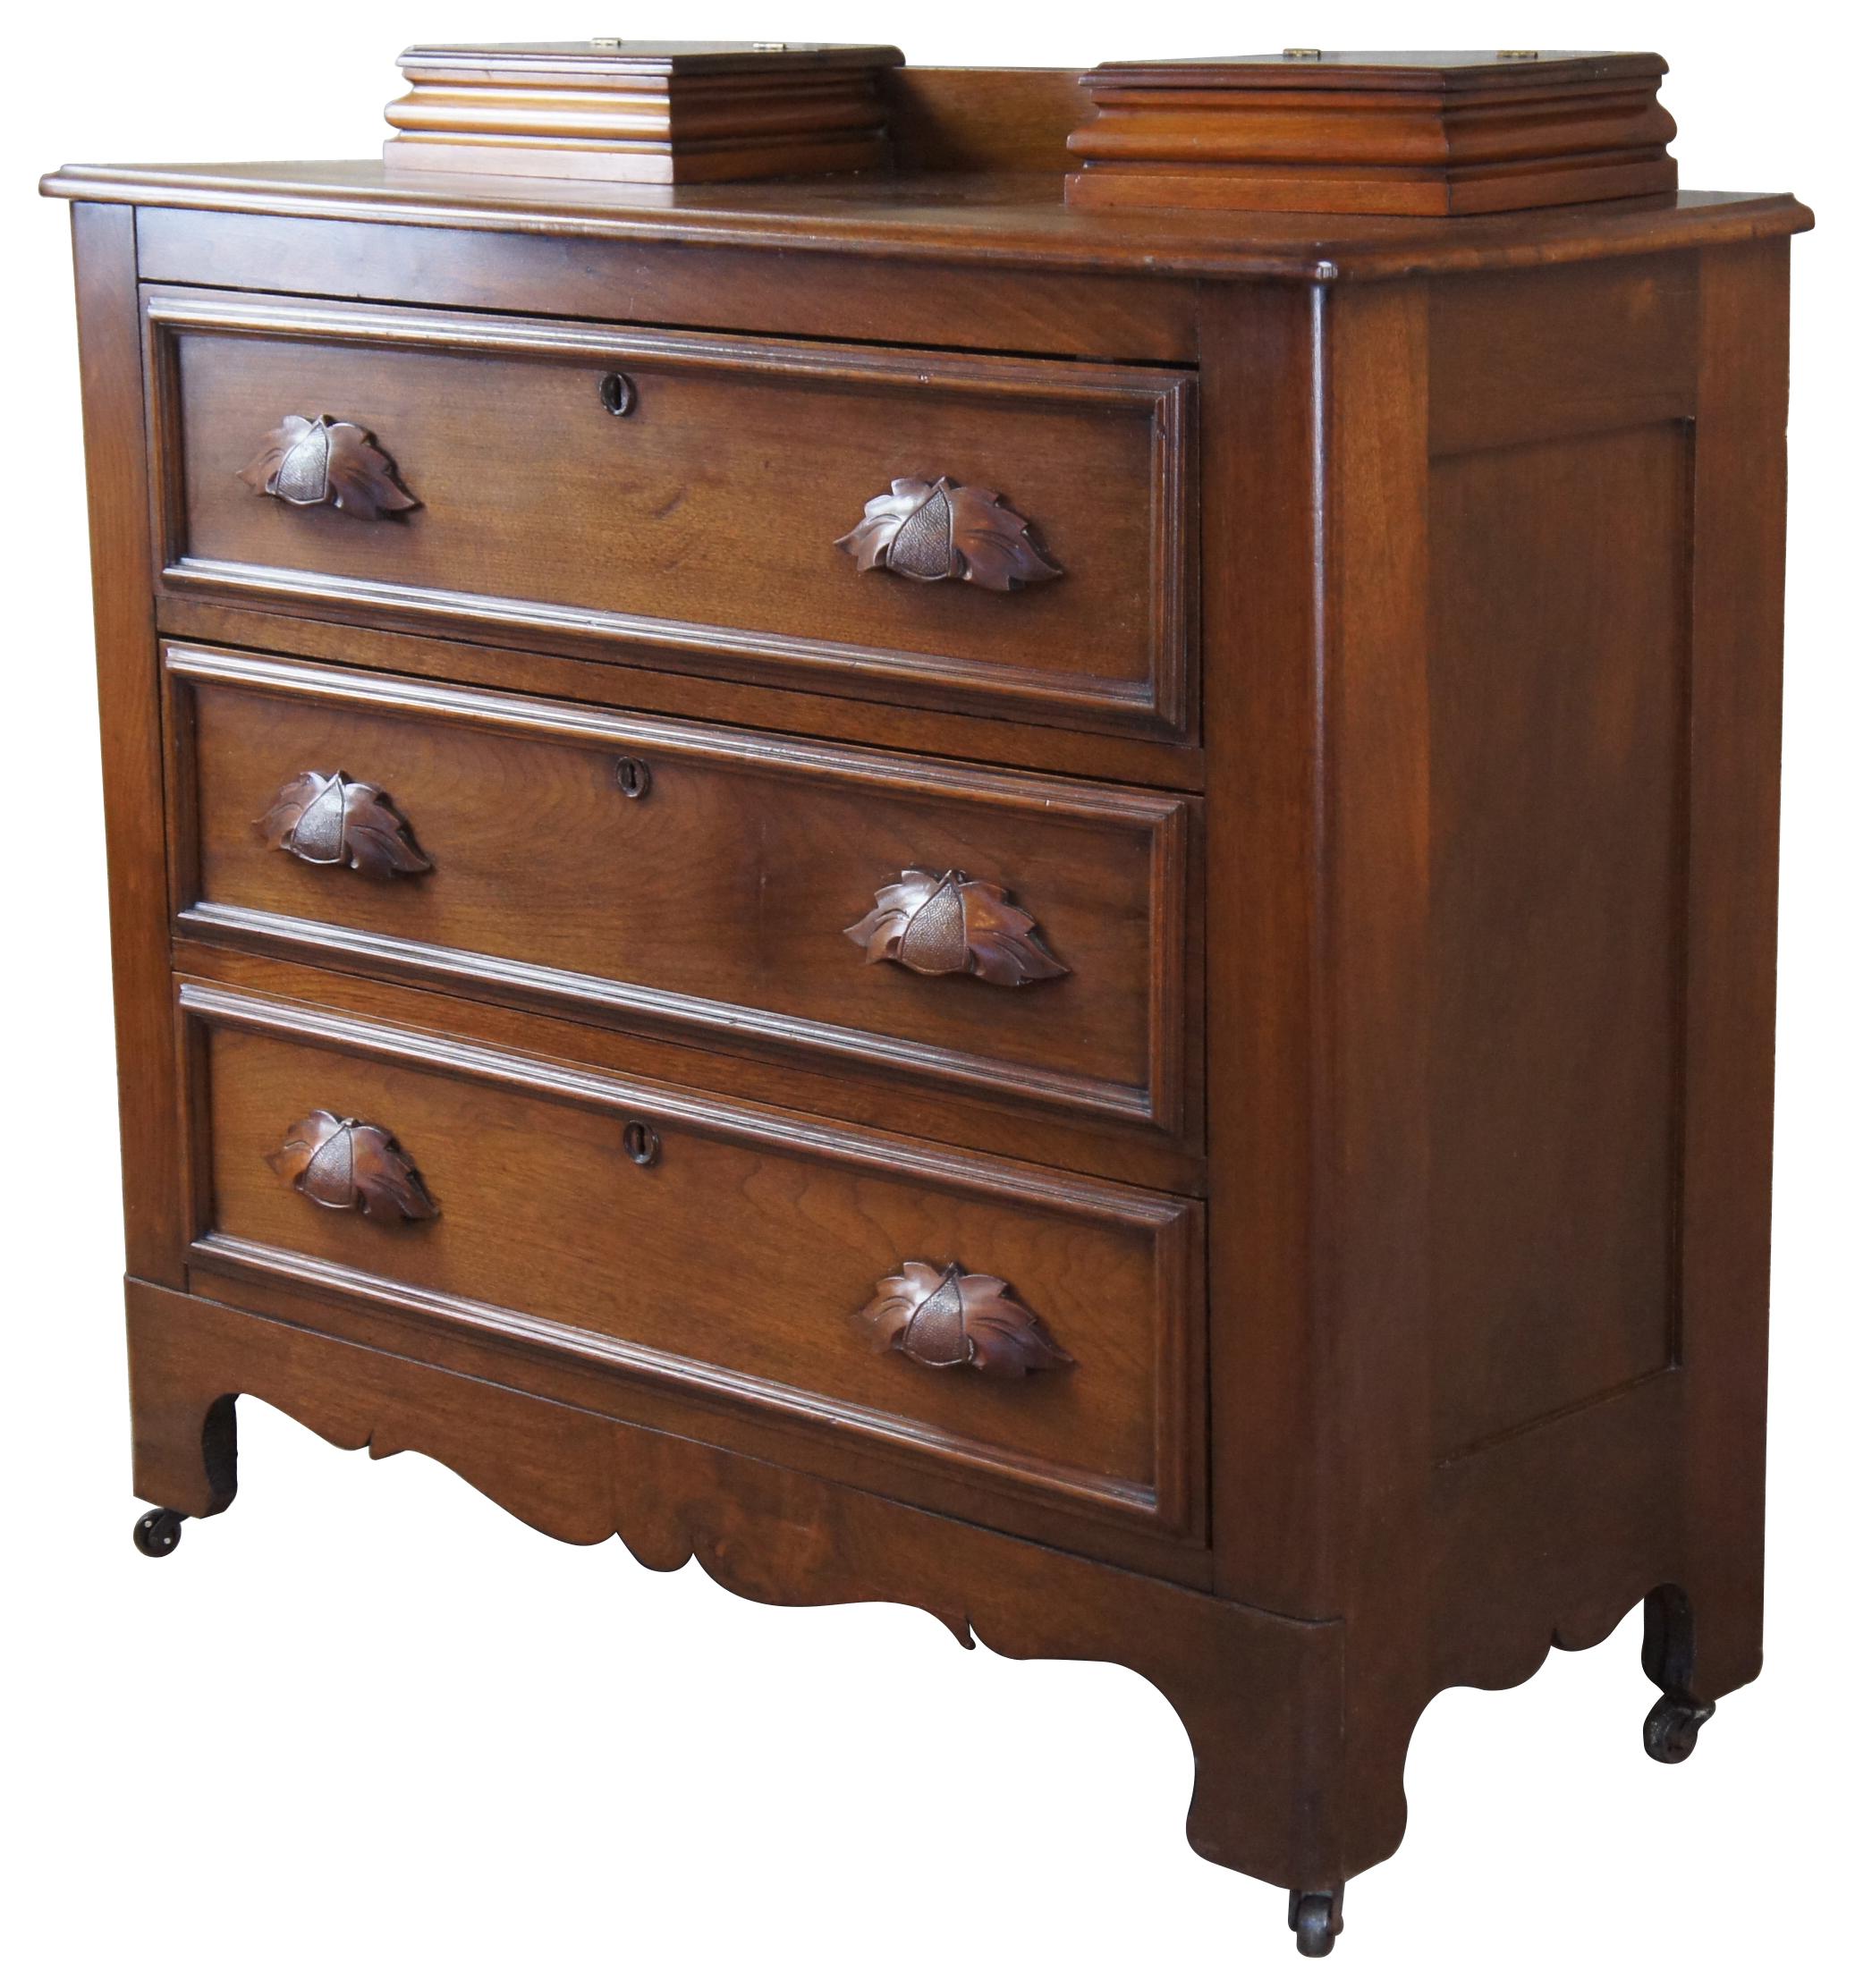 Circa 1880s Victorian dresser. Made from walnut with two glovebox drawers over three larger lower drawers. Features ovular shaped drawer trim, leaf carved pulls and serpentine cut lower apron. The drawers are constructed using the Knapp Joint. The